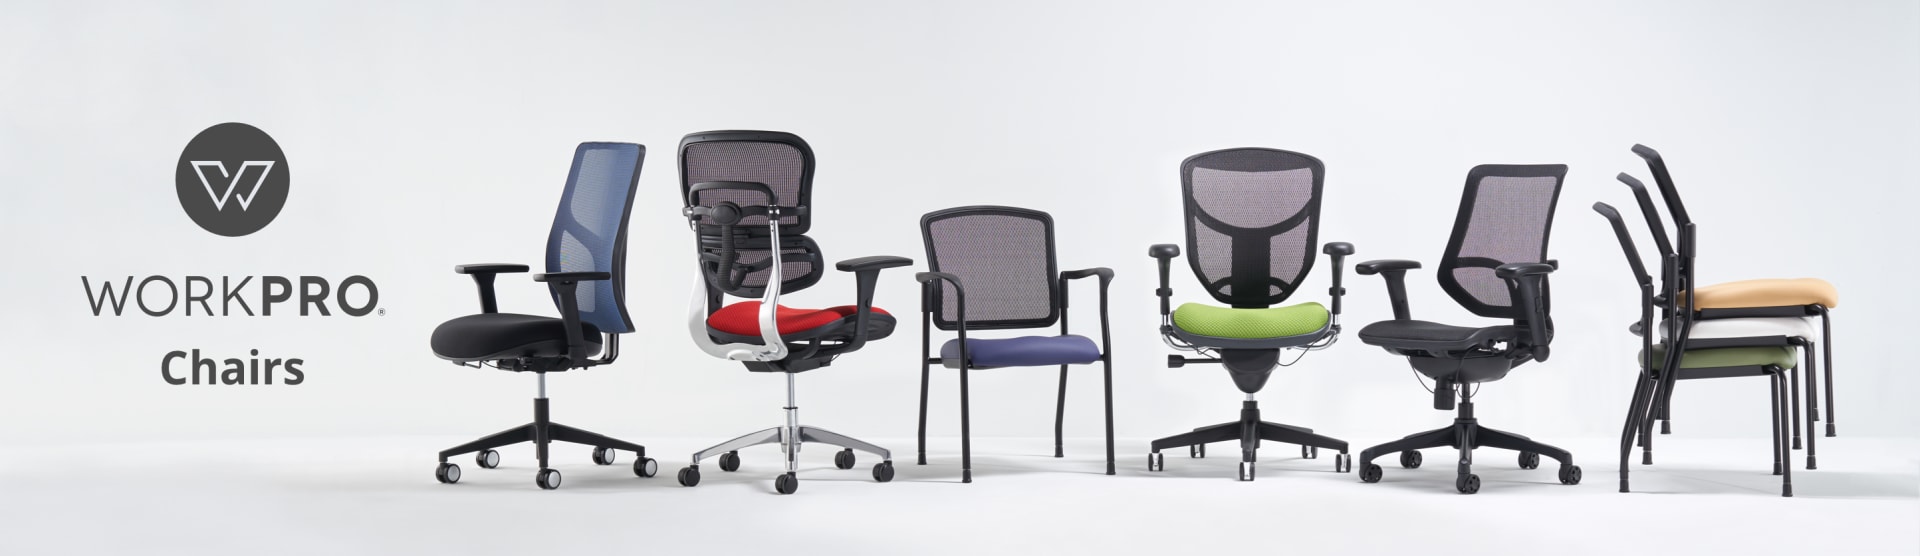 workpro chairs